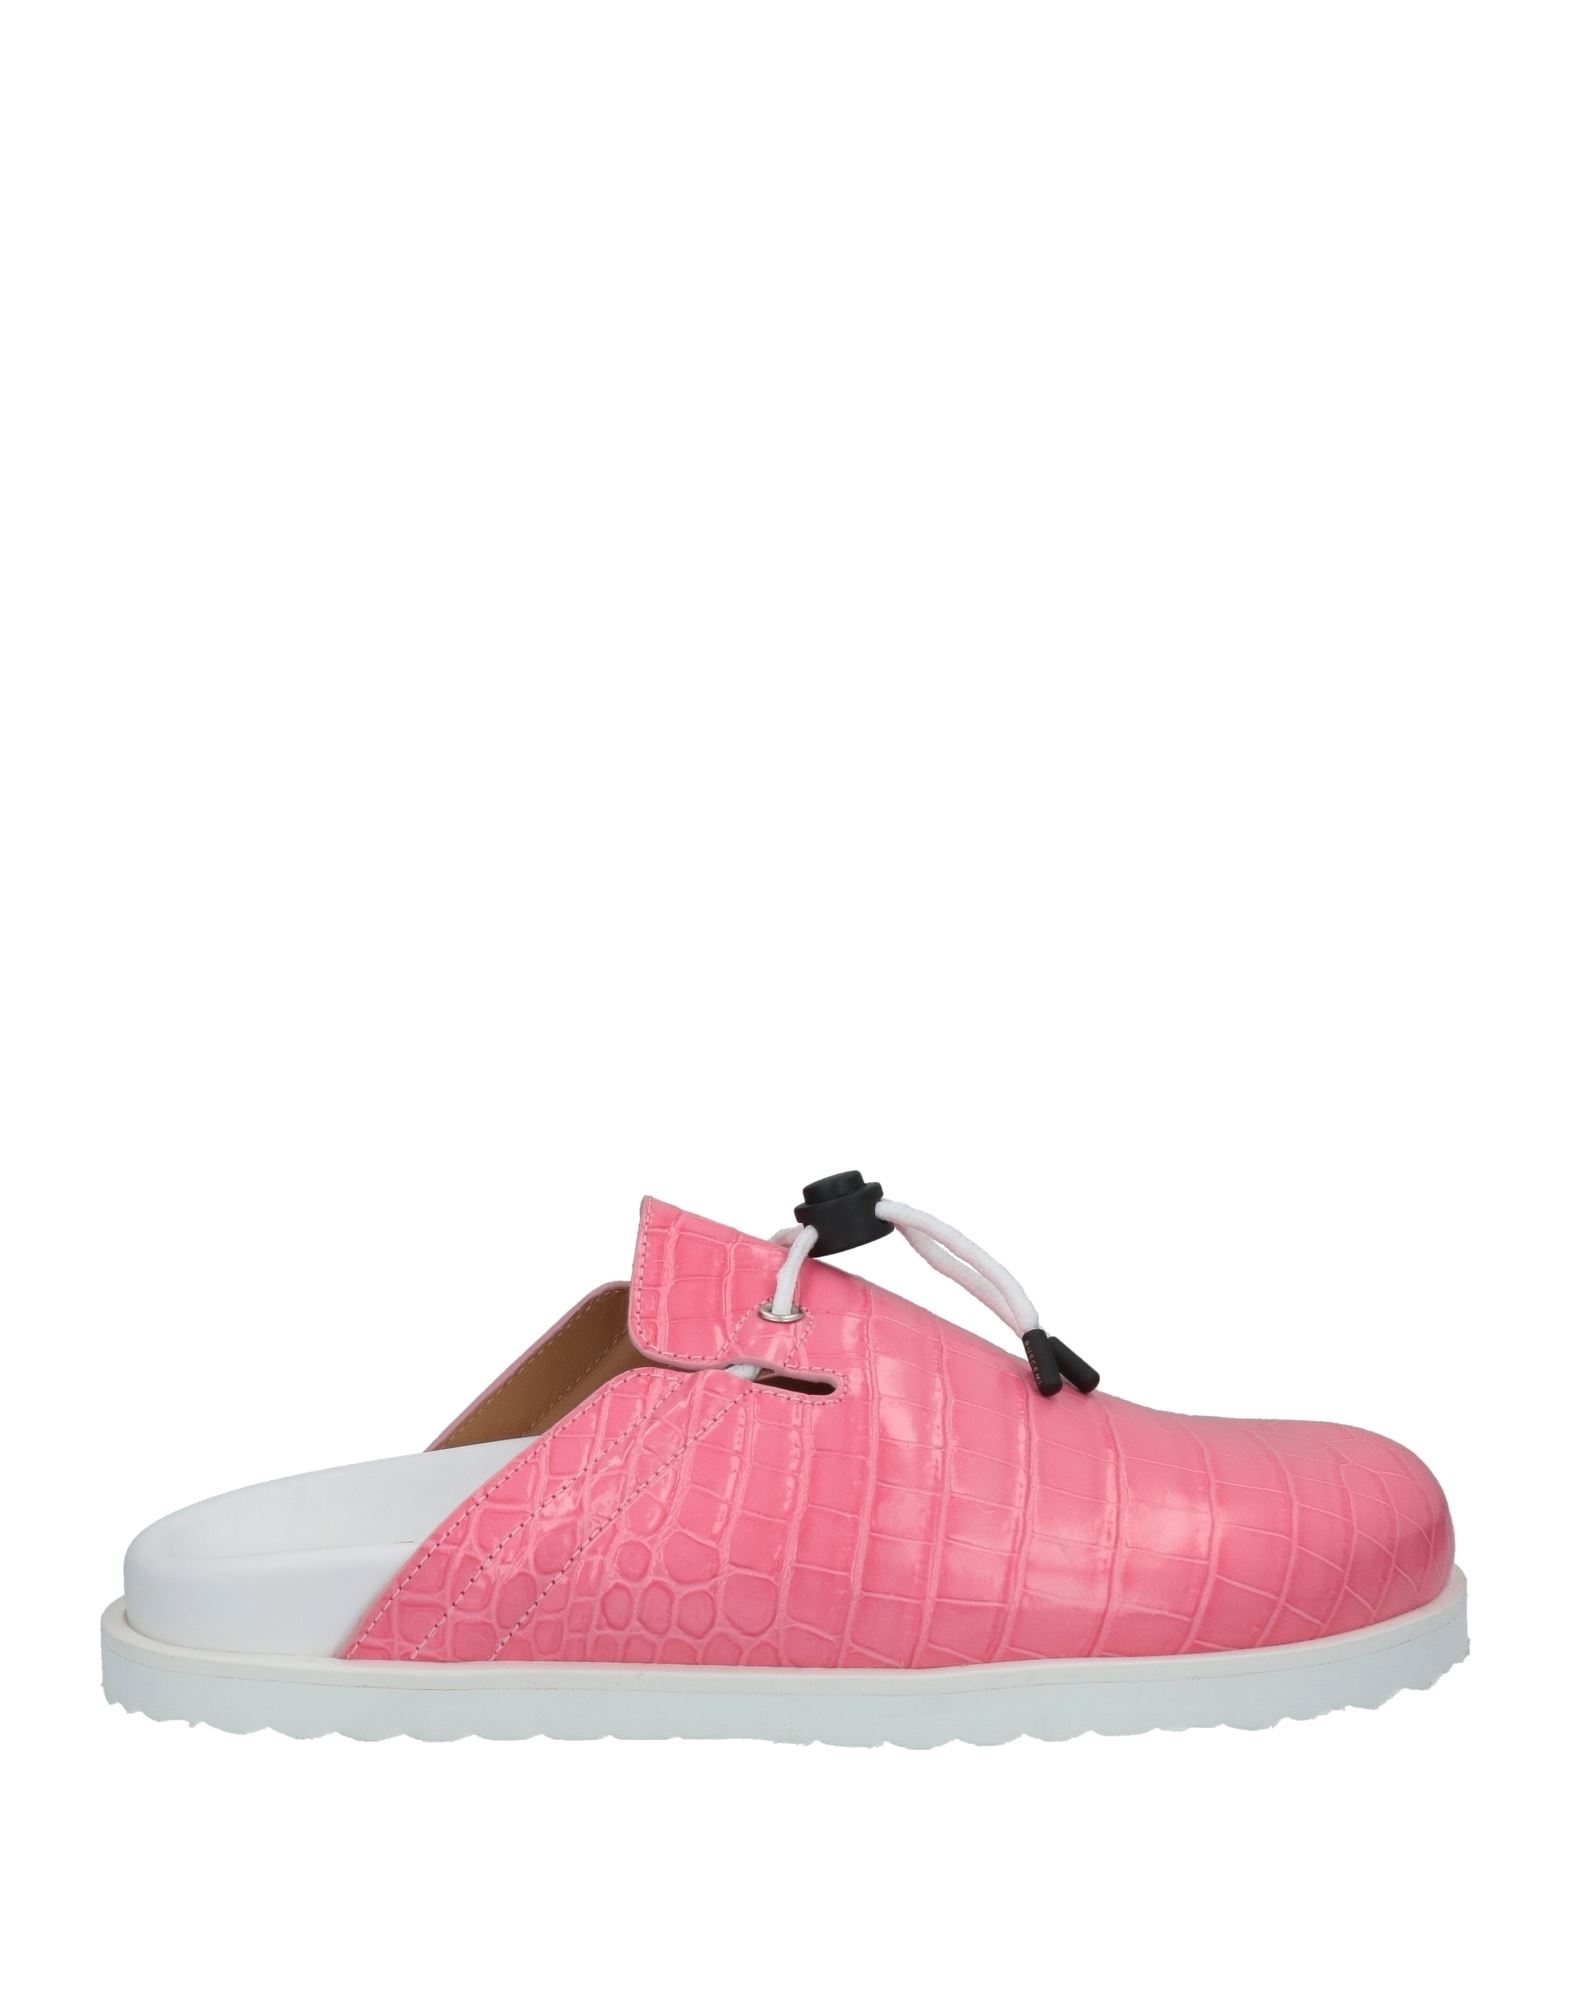 Buscemi Man Mules & Clogs Pink Size 7 Soft Leather